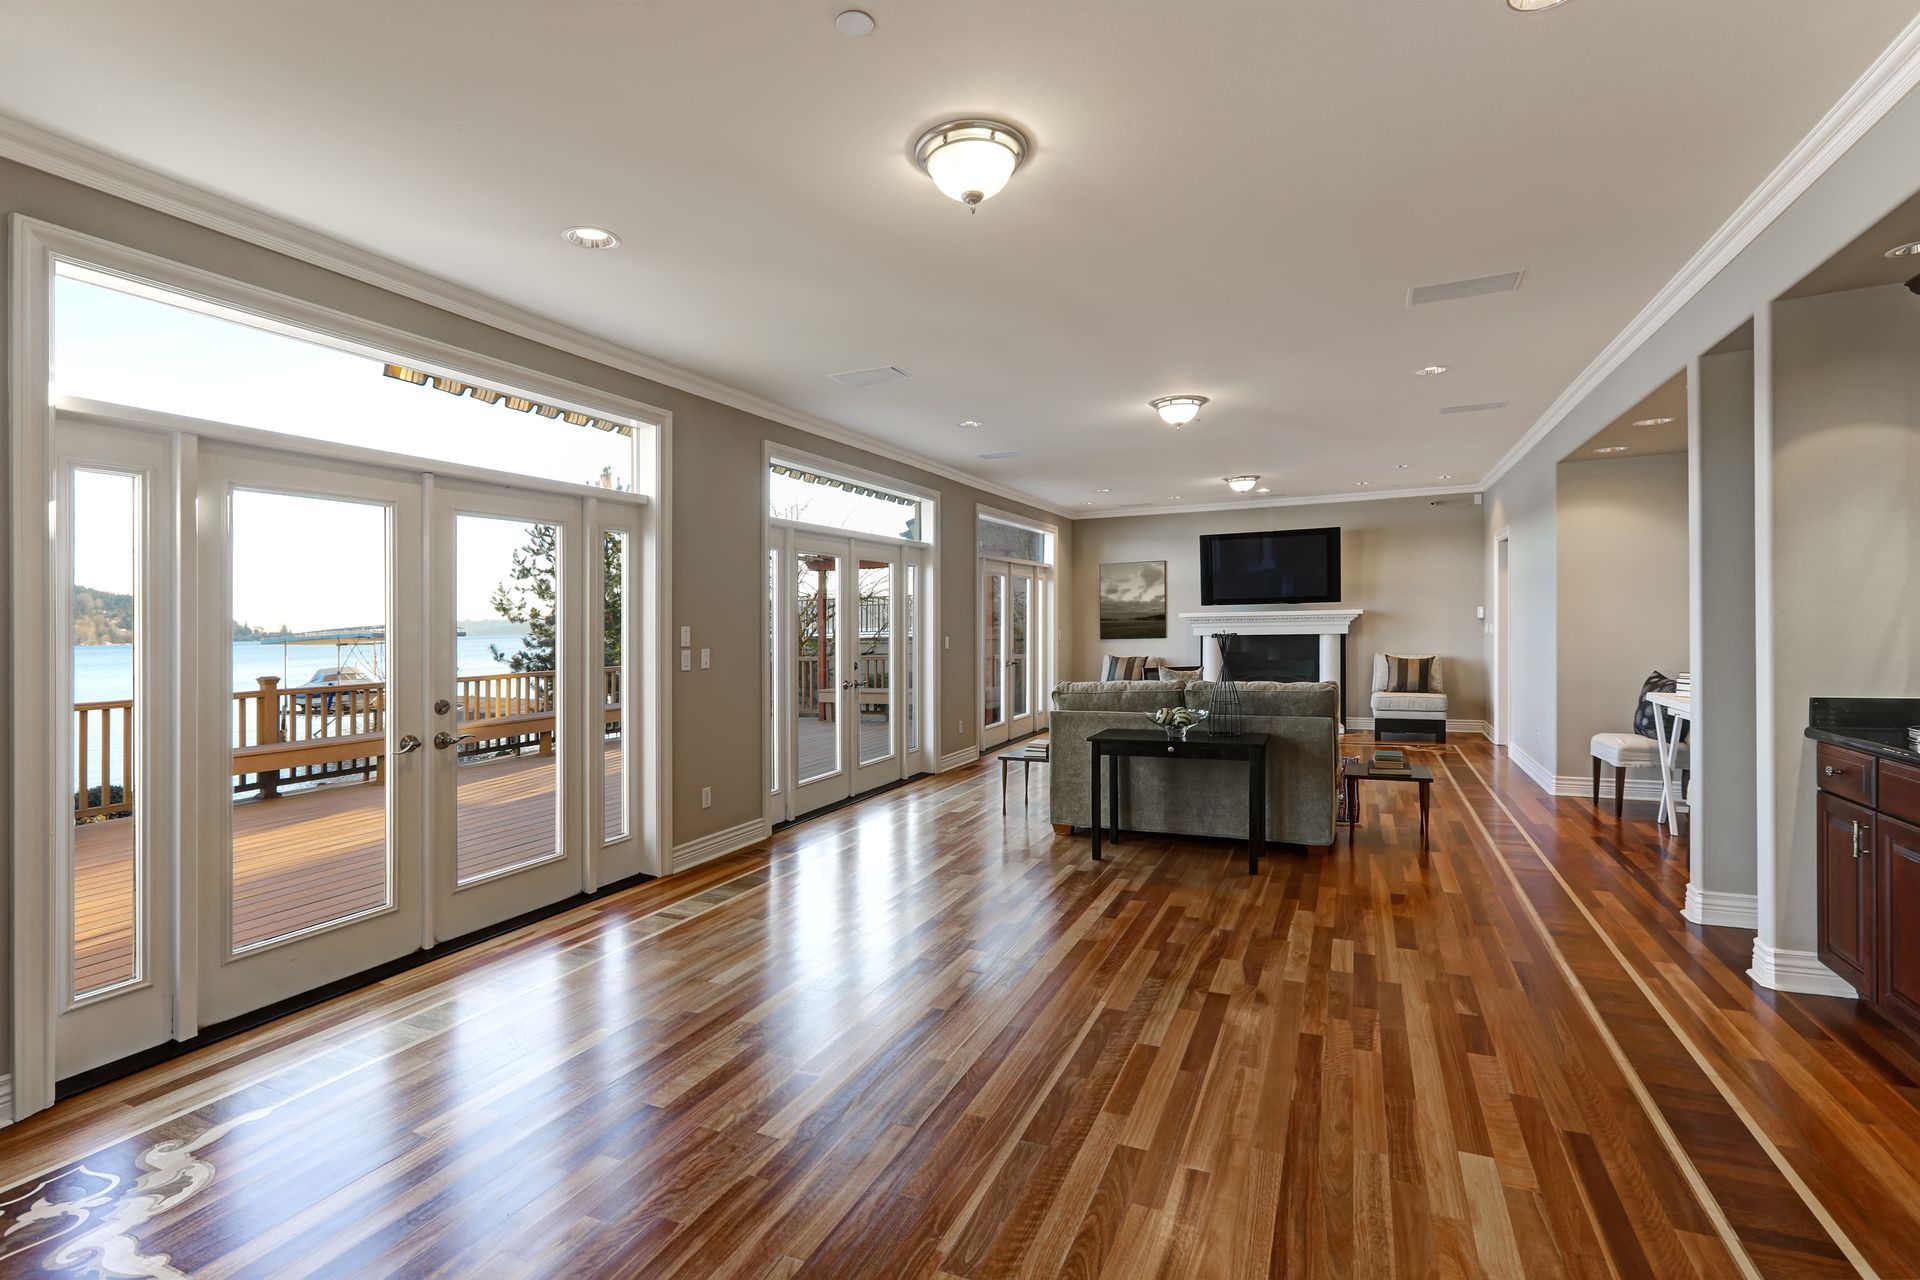 A living room with hardwood floors and lots of windows